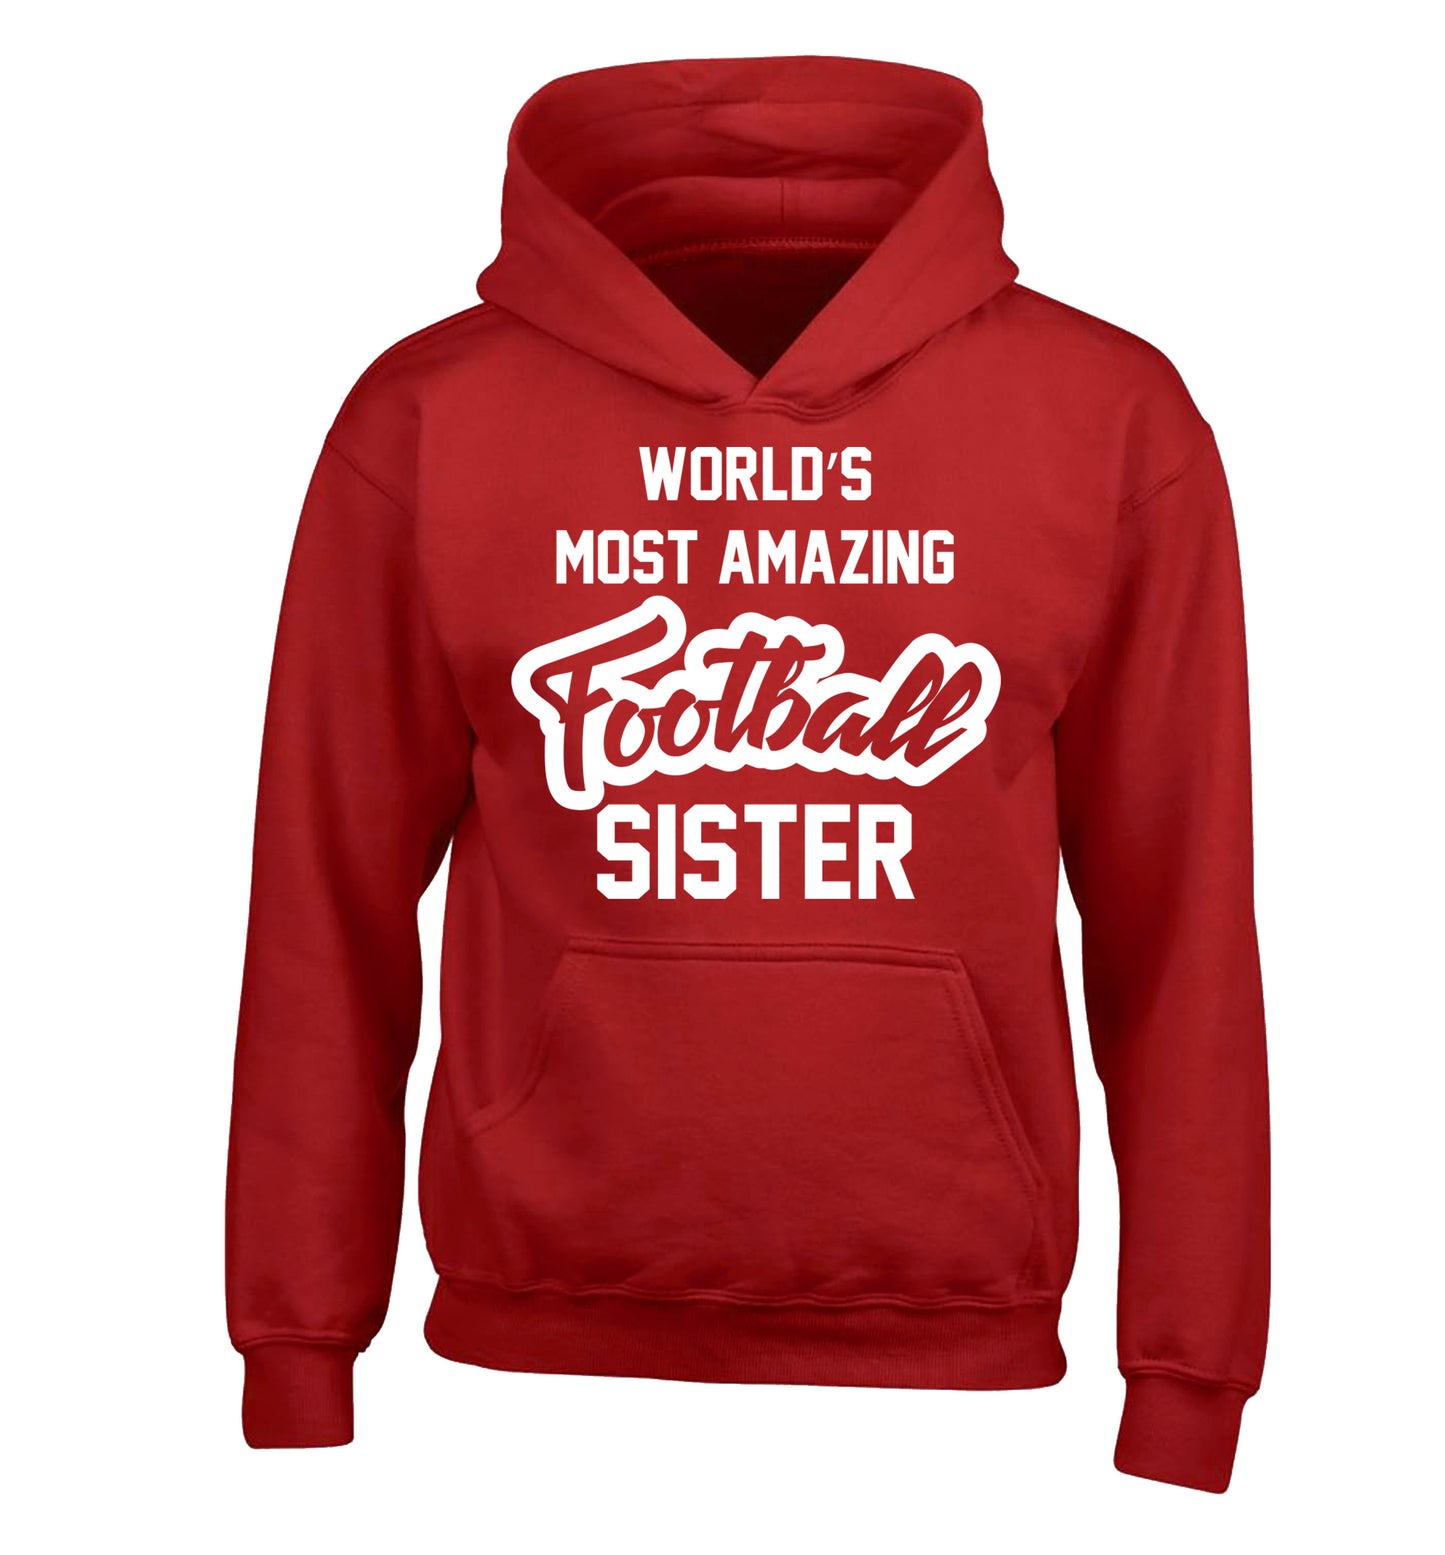 Worlds most amazing football sister children's red hoodie 12-14 Years